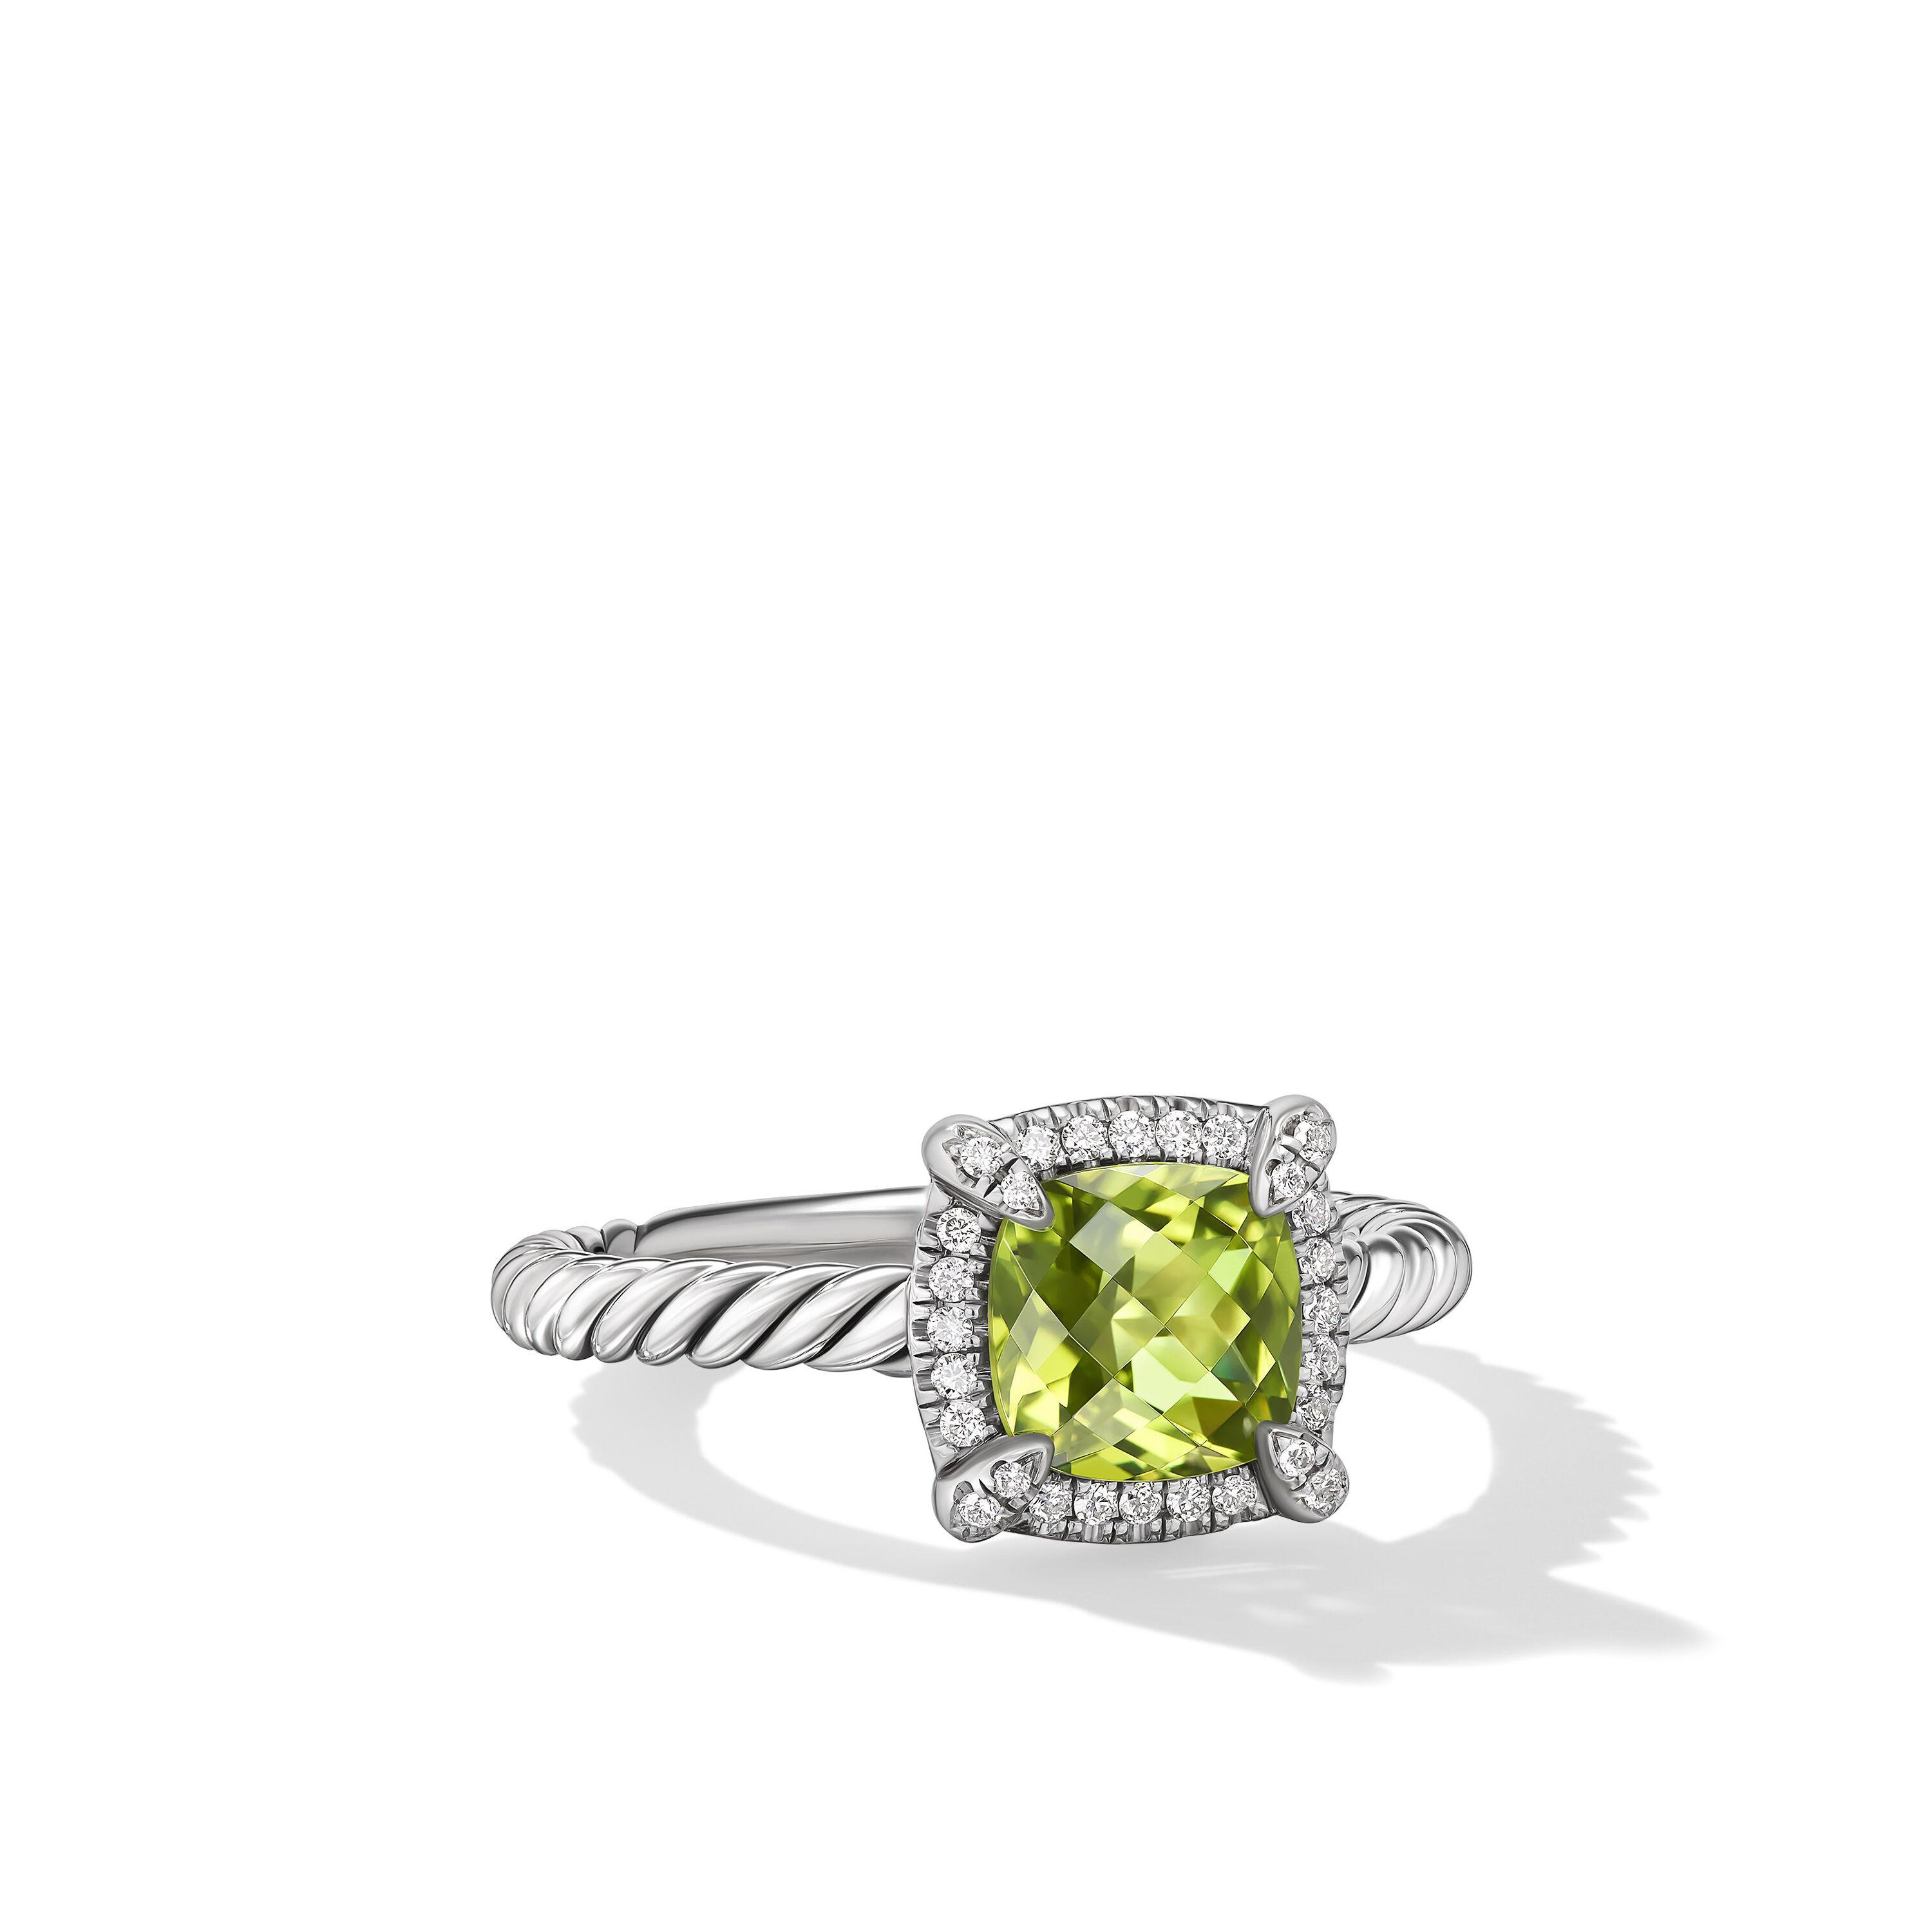 David Yurman Petite Chatelaine Pave Bezel Ring in Sterling Silver with Peridot and Diamonds, Size 5.5 0